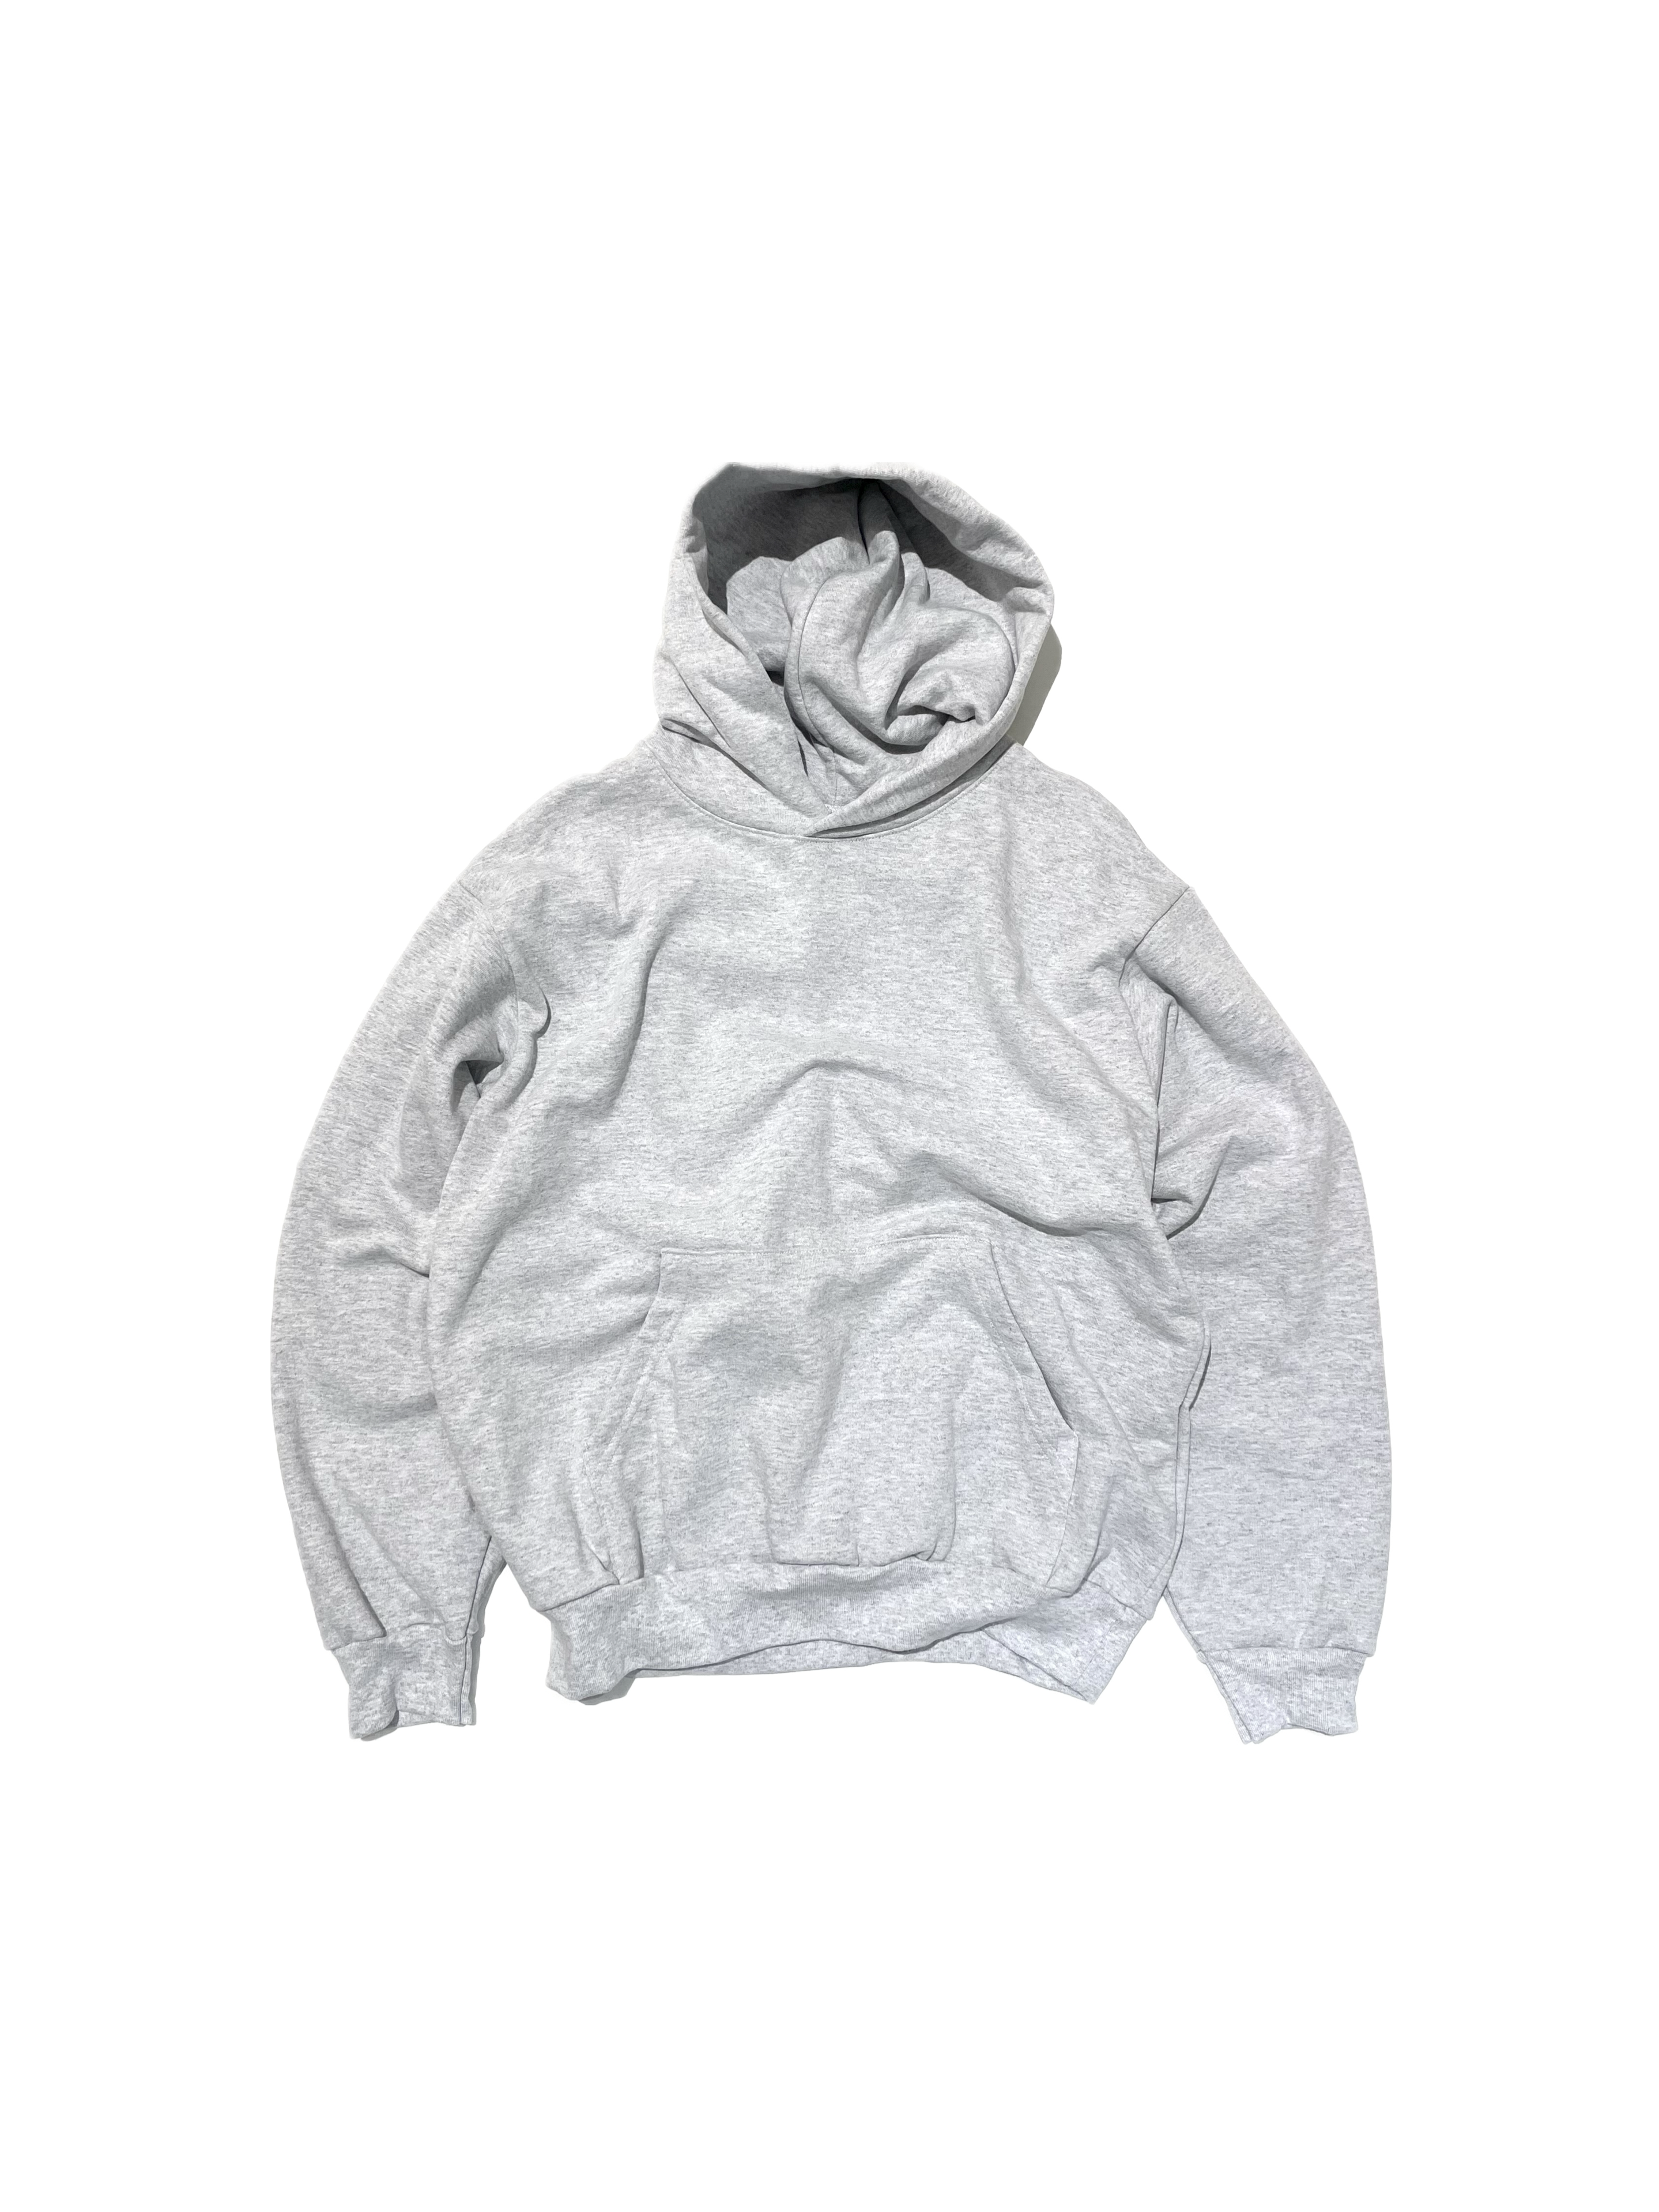 MWF1049 - 10 oz. Mid-weight Poly Cotton Fleece Wide Hoodie